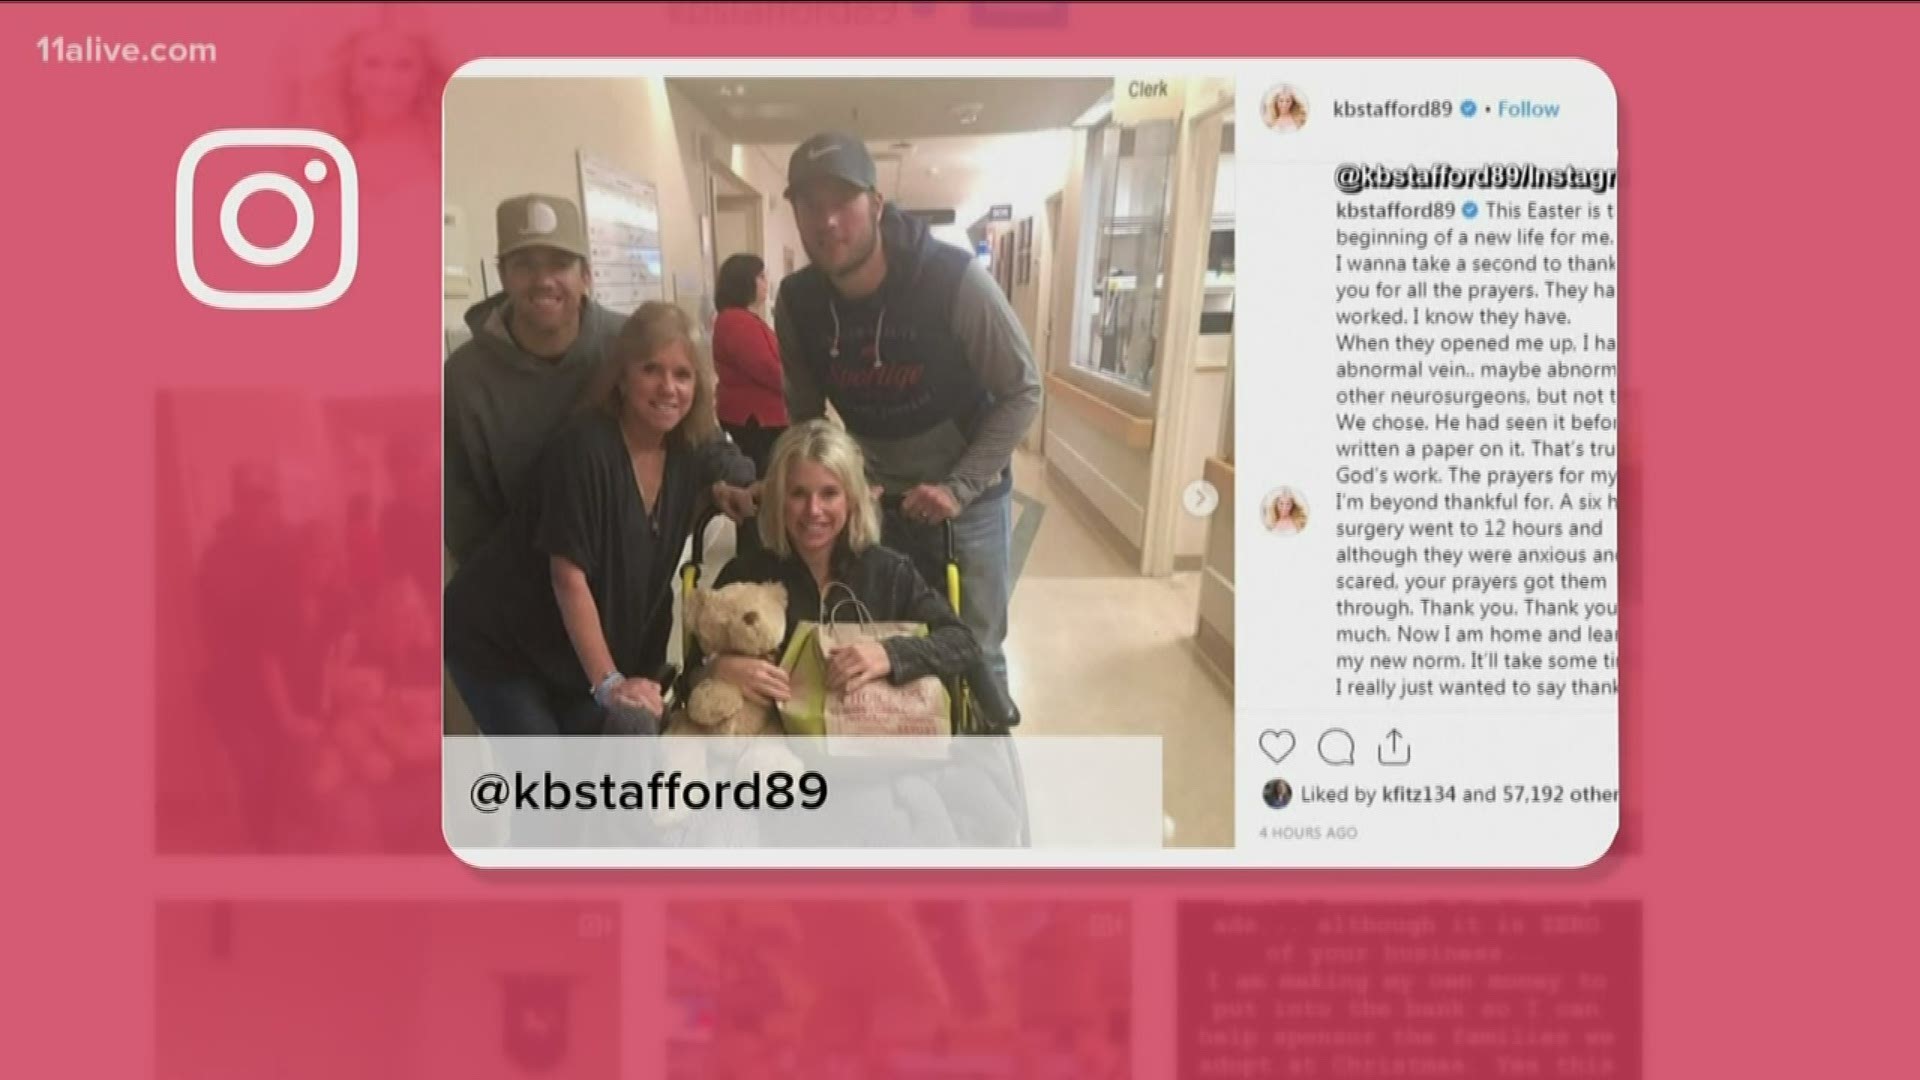 On April 3, Kelly Stafford – a former UGA cheerleader – revealed she required an operation to combat the effects of "acoustic neuroma."